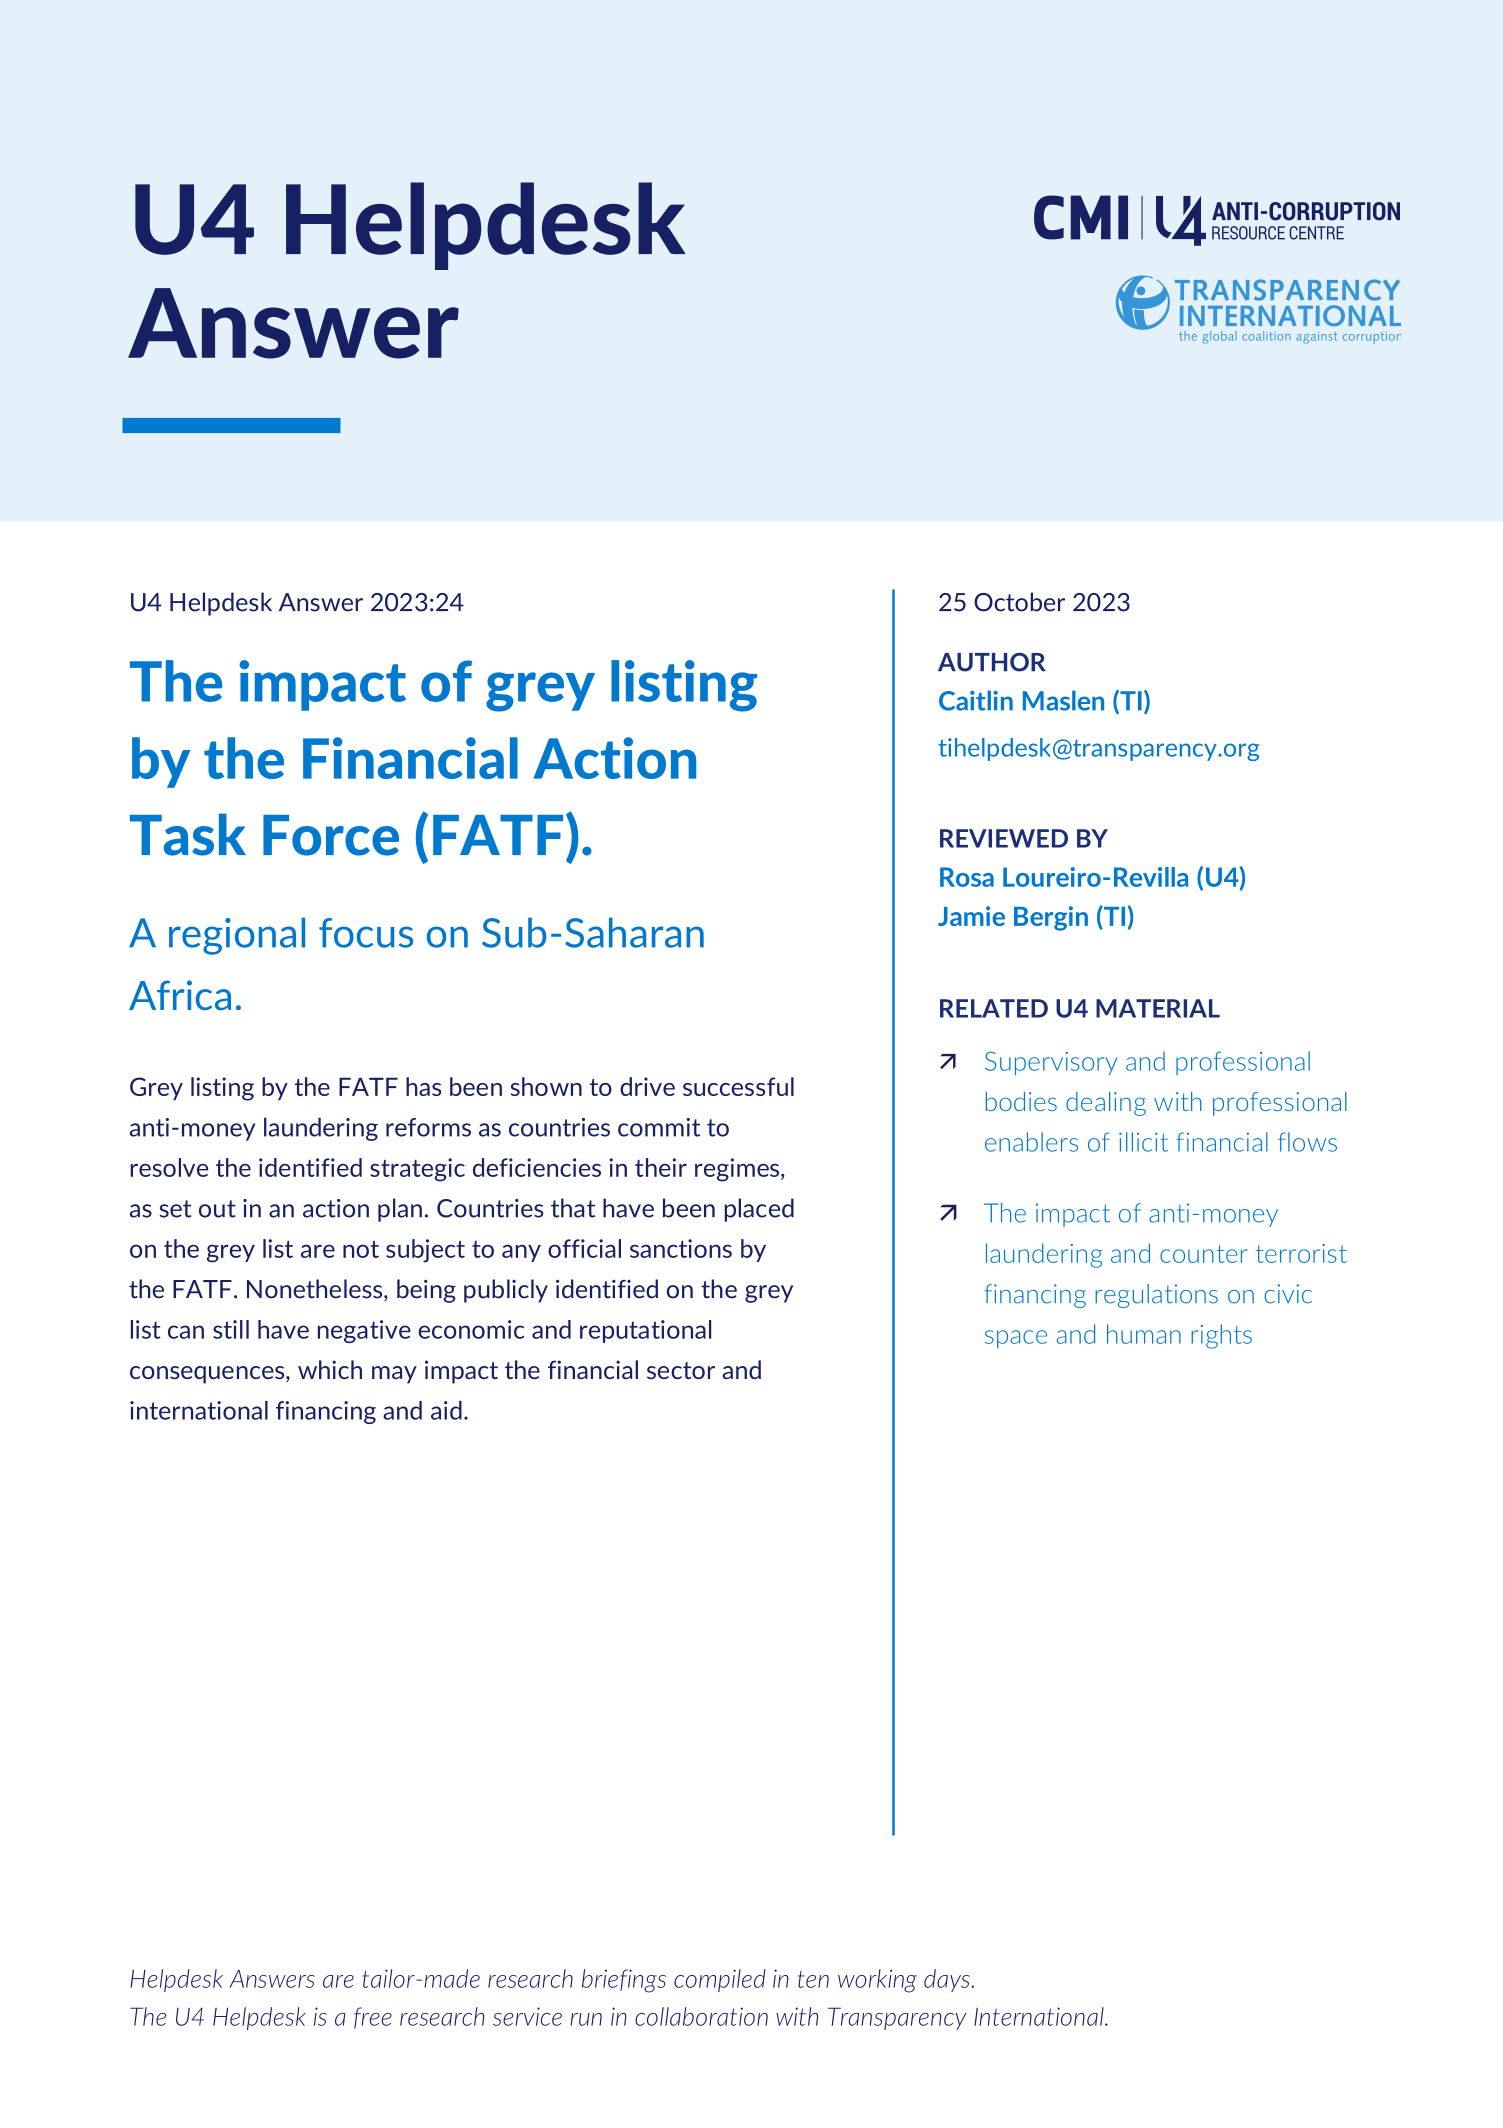 The impact of grey listing by the Financial Action Task Force (FATF).